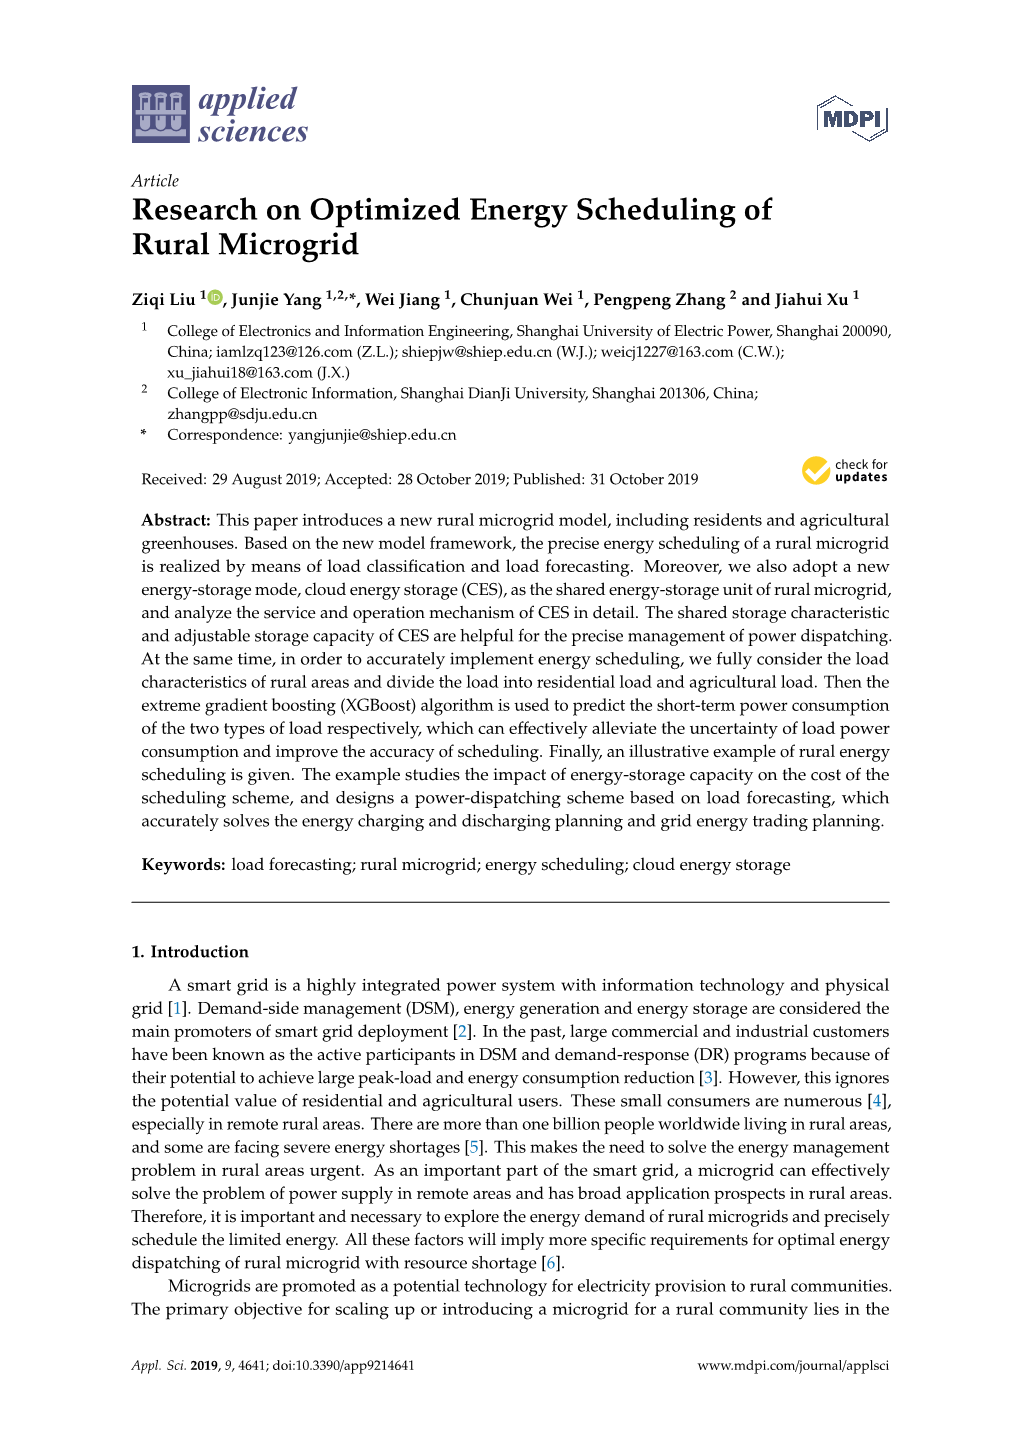 Research on Optimized Energy Scheduling of Rural Microgrid